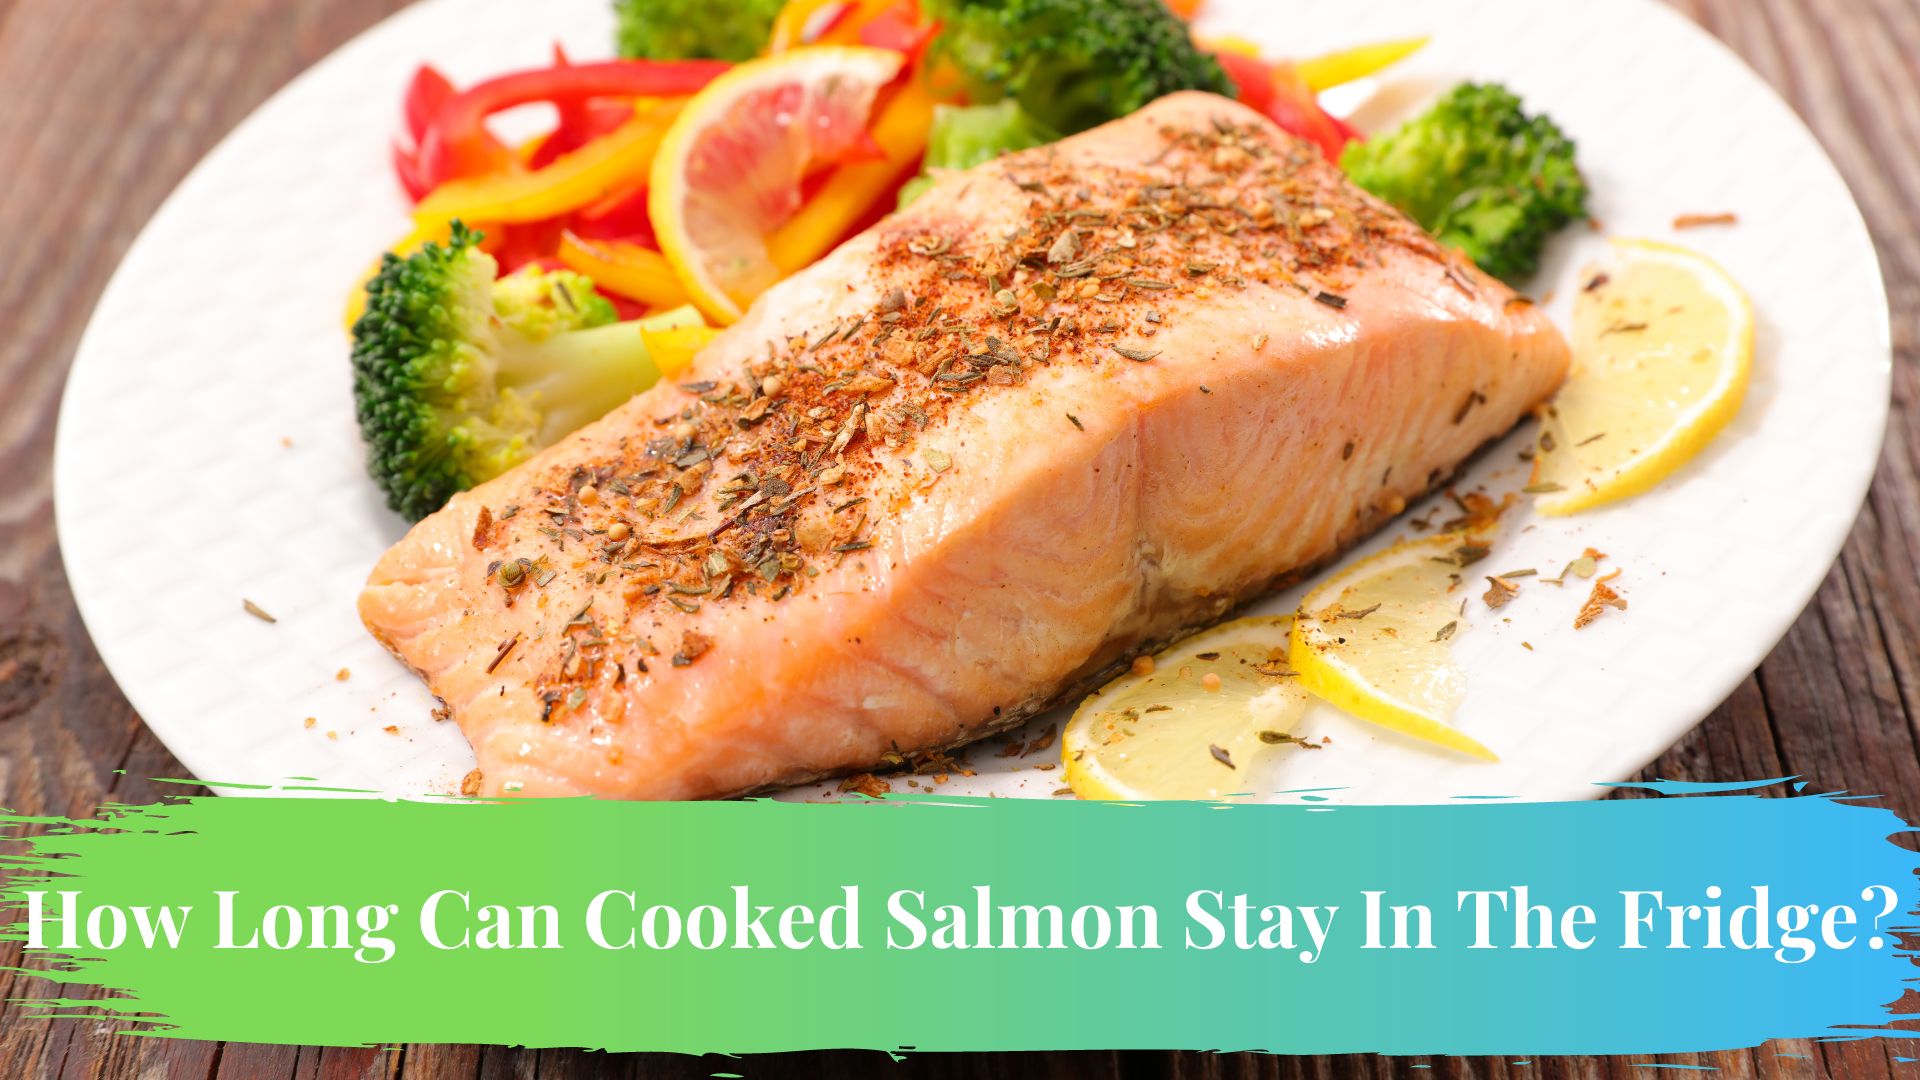 How Long Can Cooked Salmon Stay In The Fridge